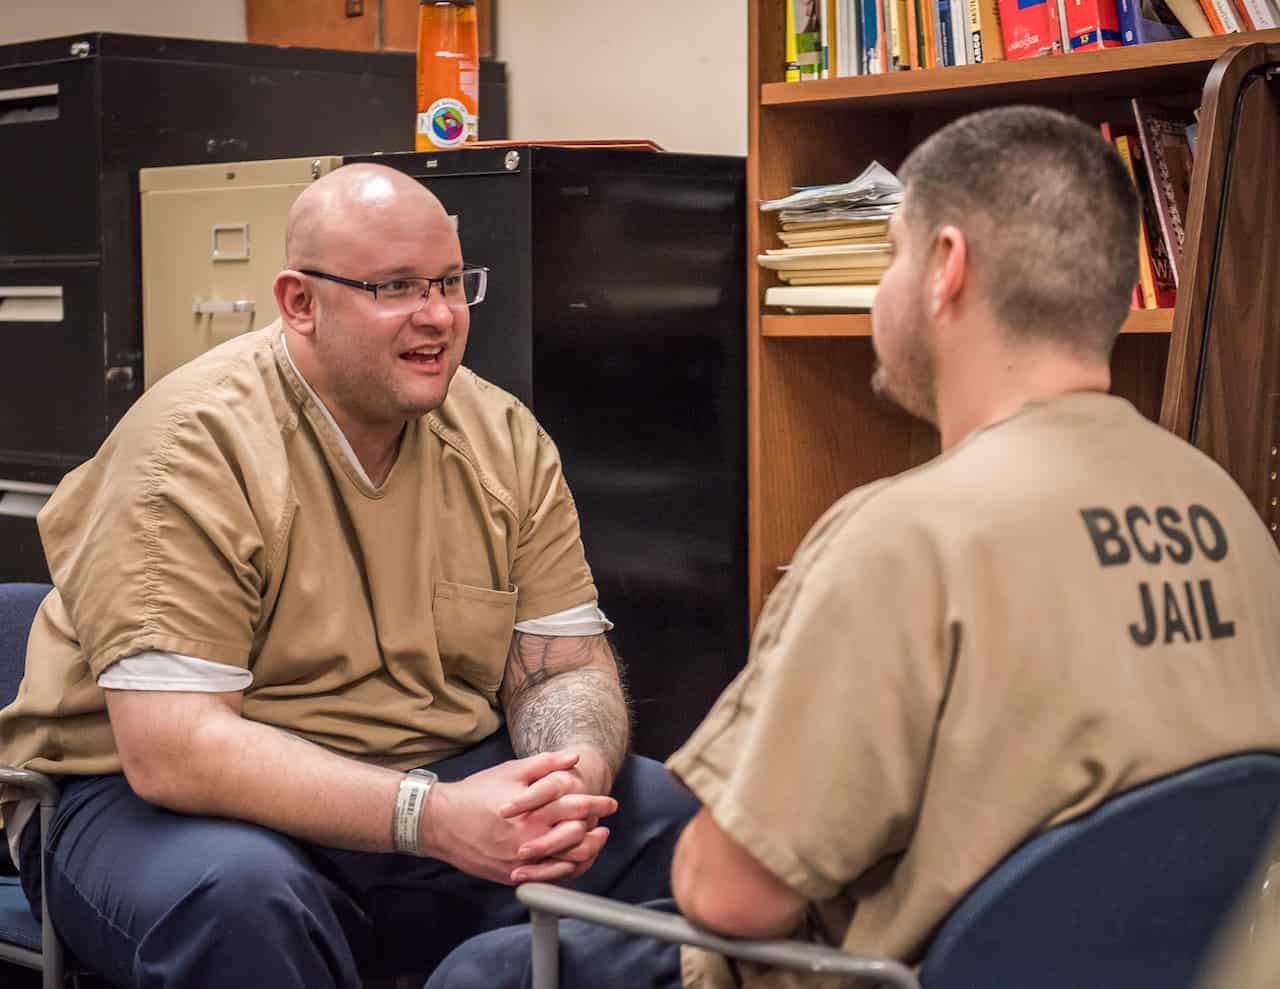 Authentic Relating for Inmates at Boulder County Jail ART International